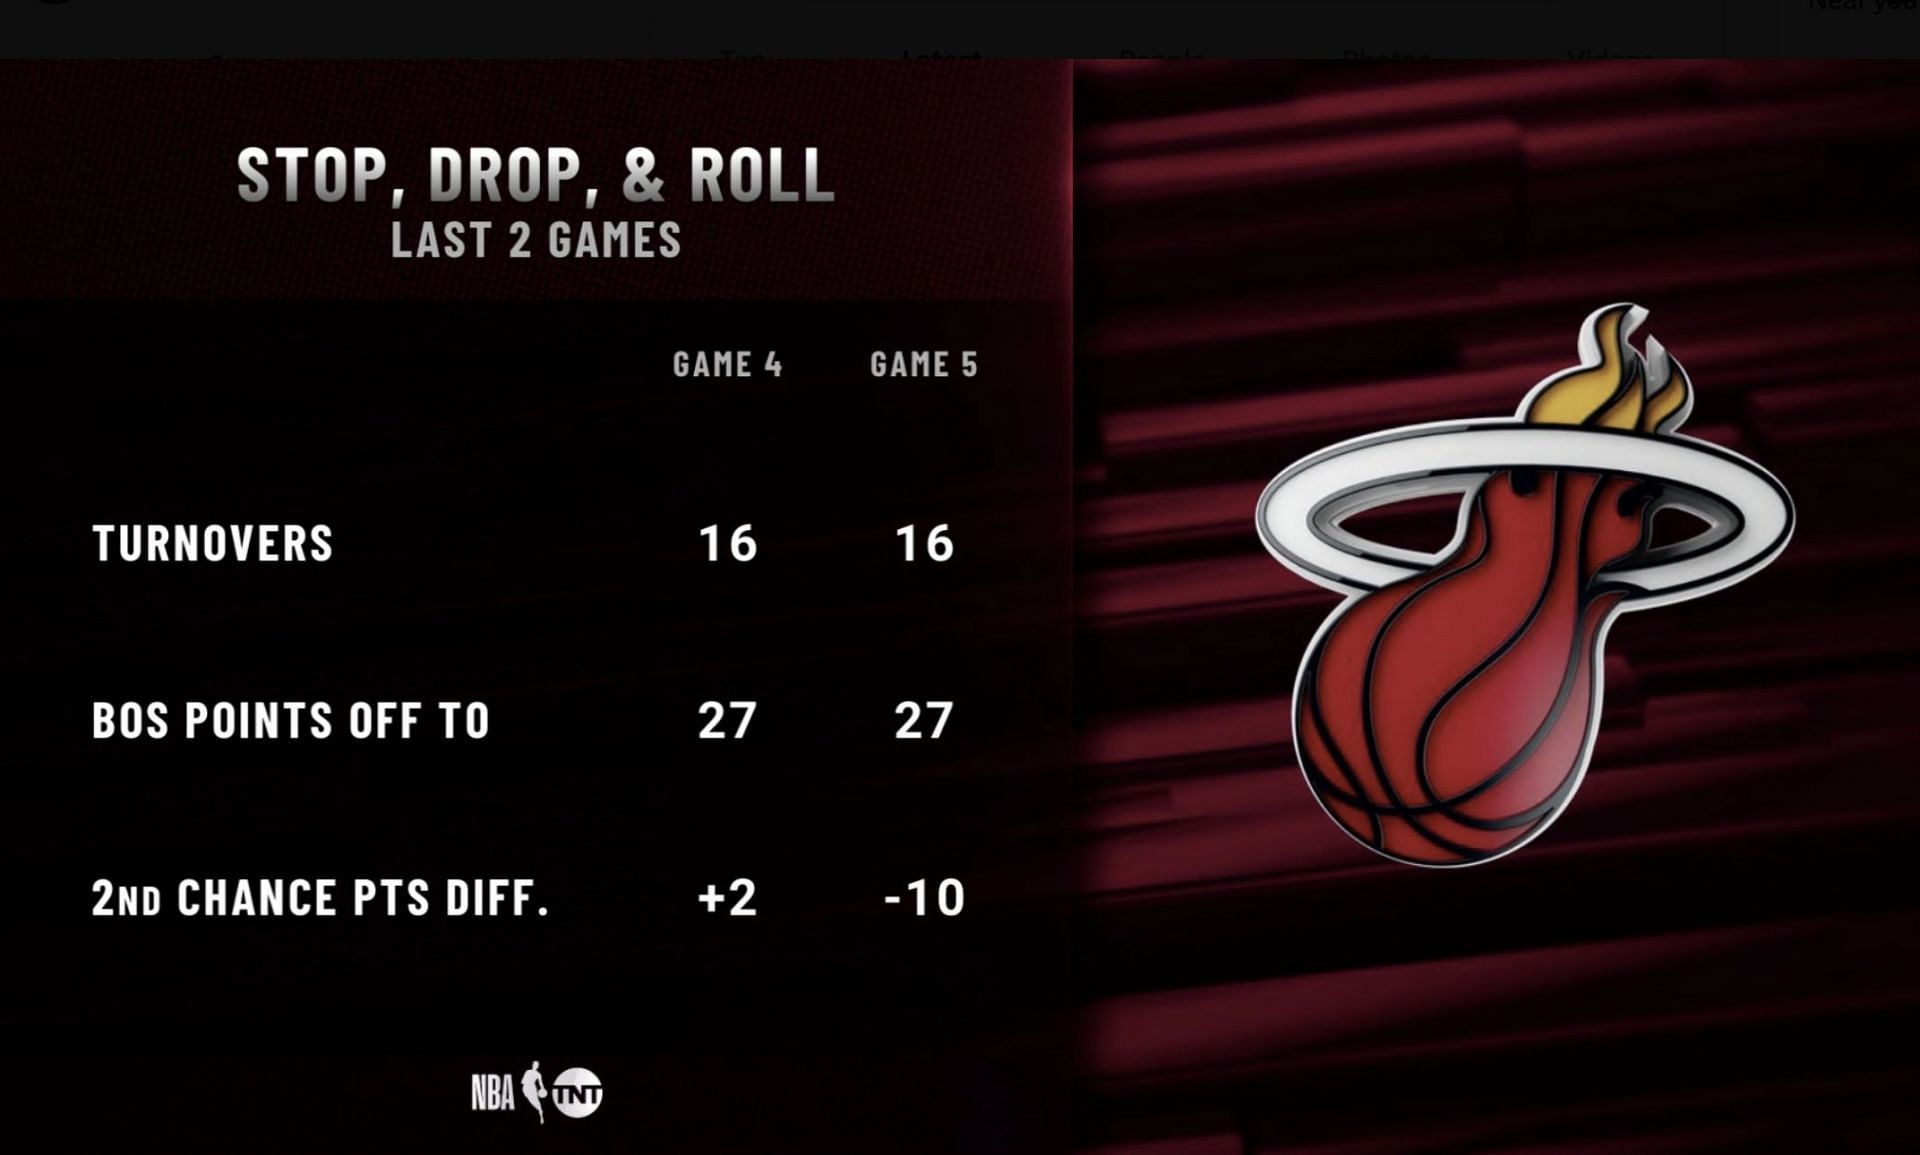 Heat struggled in Games 4 and 5 due to turnovers